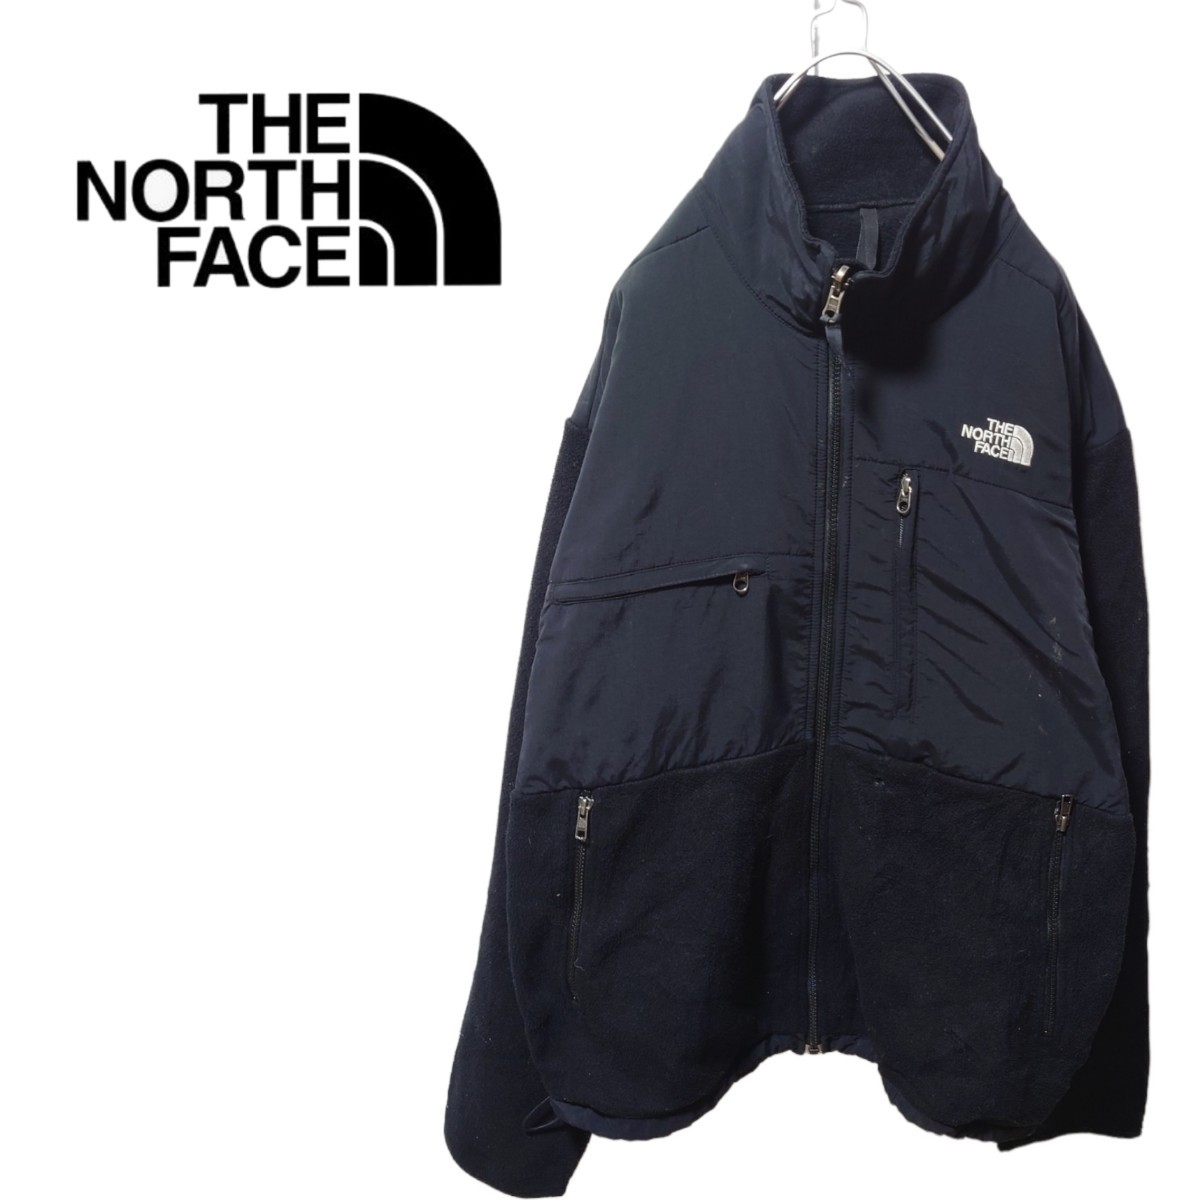 【THE NORTH FACE】 フリース デナリジャケット A-1026